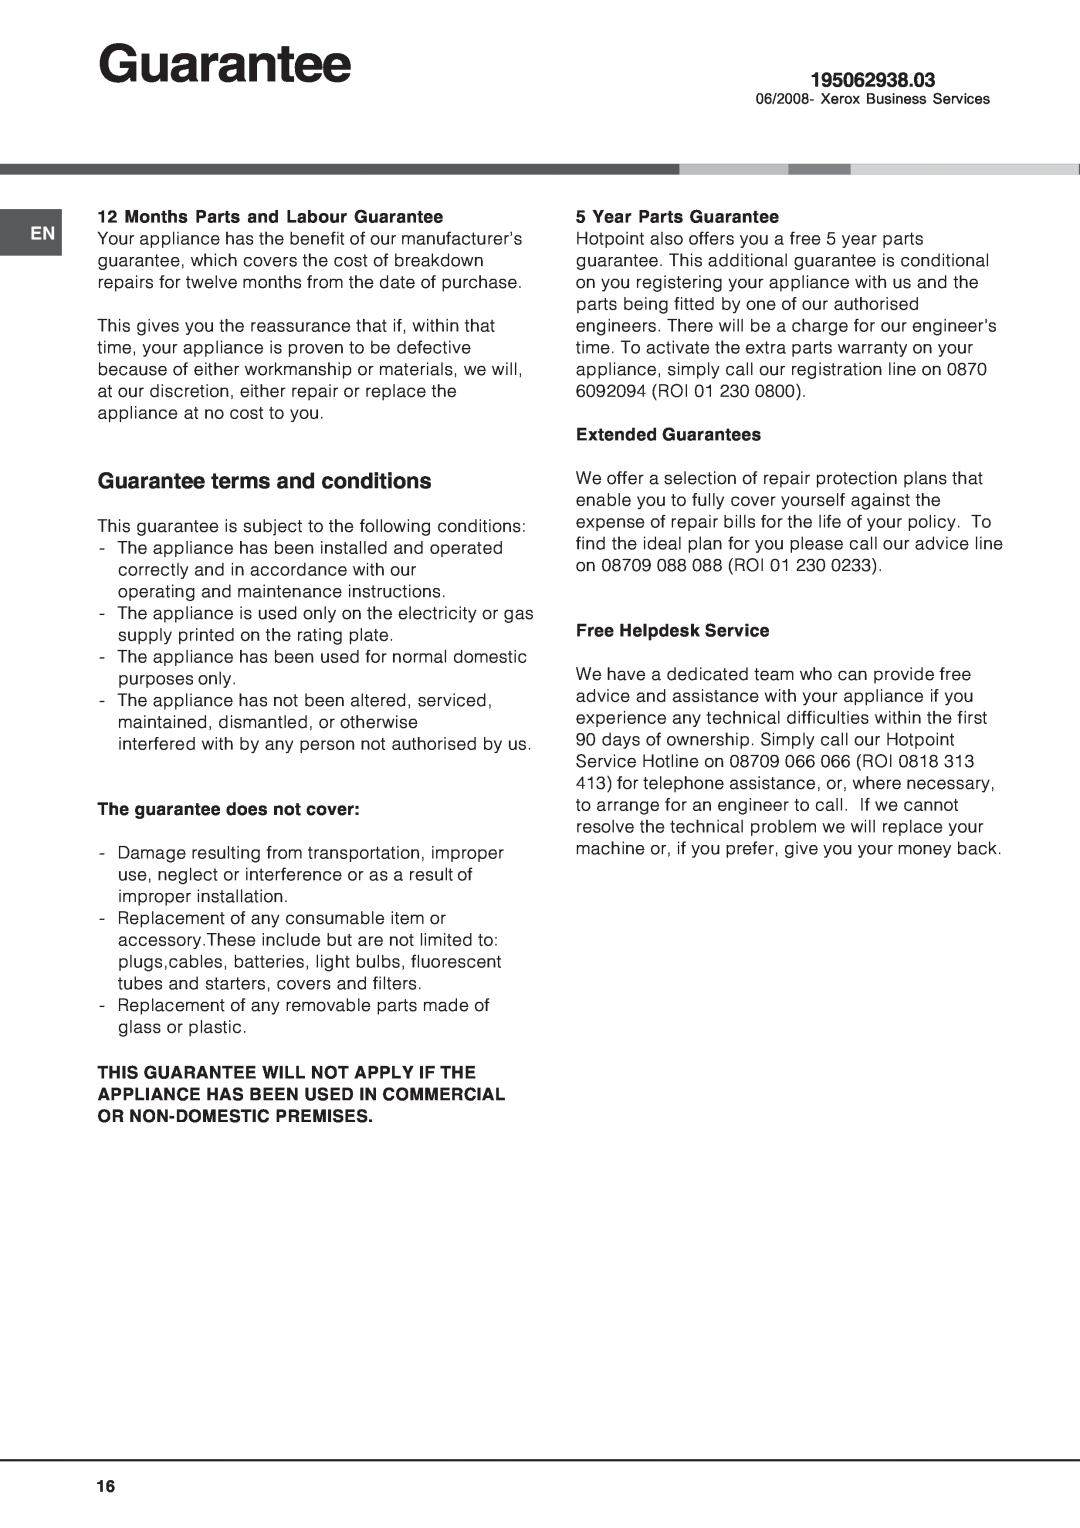 Hotpoint LFT04 manual Guarantee terms and conditions, 195062938.03 